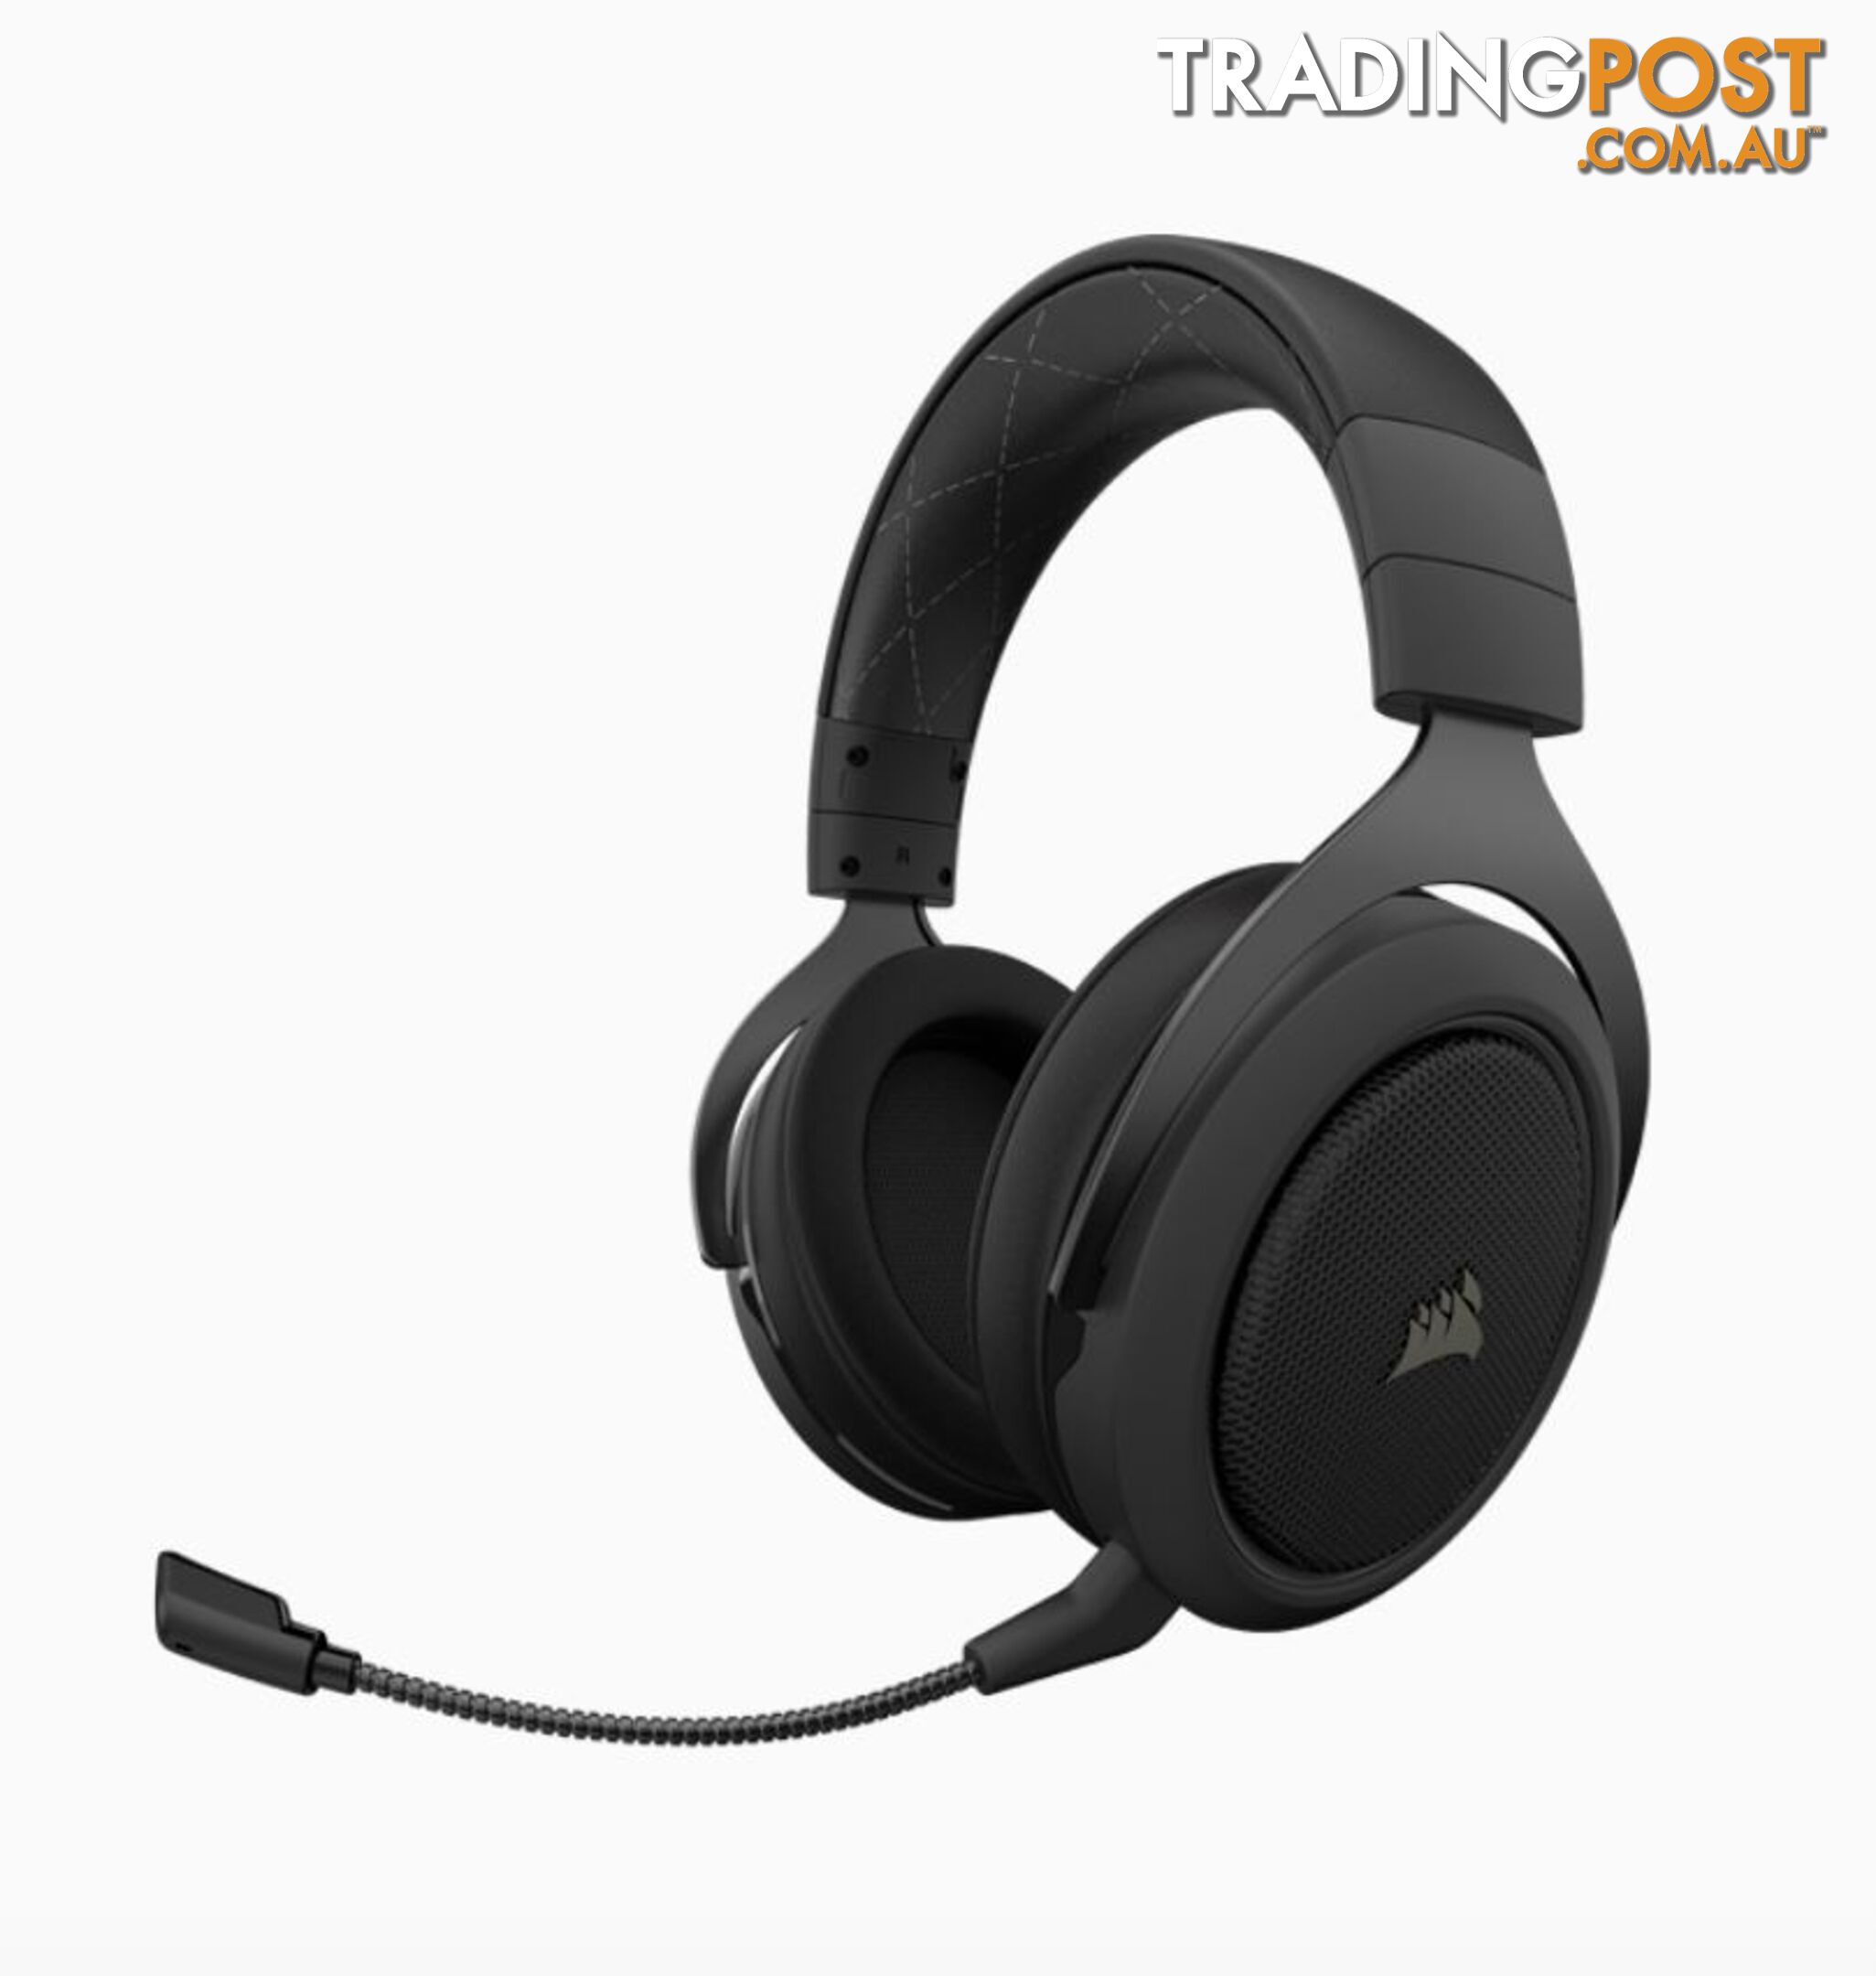 Corsair HS70 Pro Wireless Gaming Headset Carbon. 7.1 Sound, Up to 16hrs of Playback. PC and PS4 Compatible. 2 Years Warranty - SPCA-HS70PRO-CB